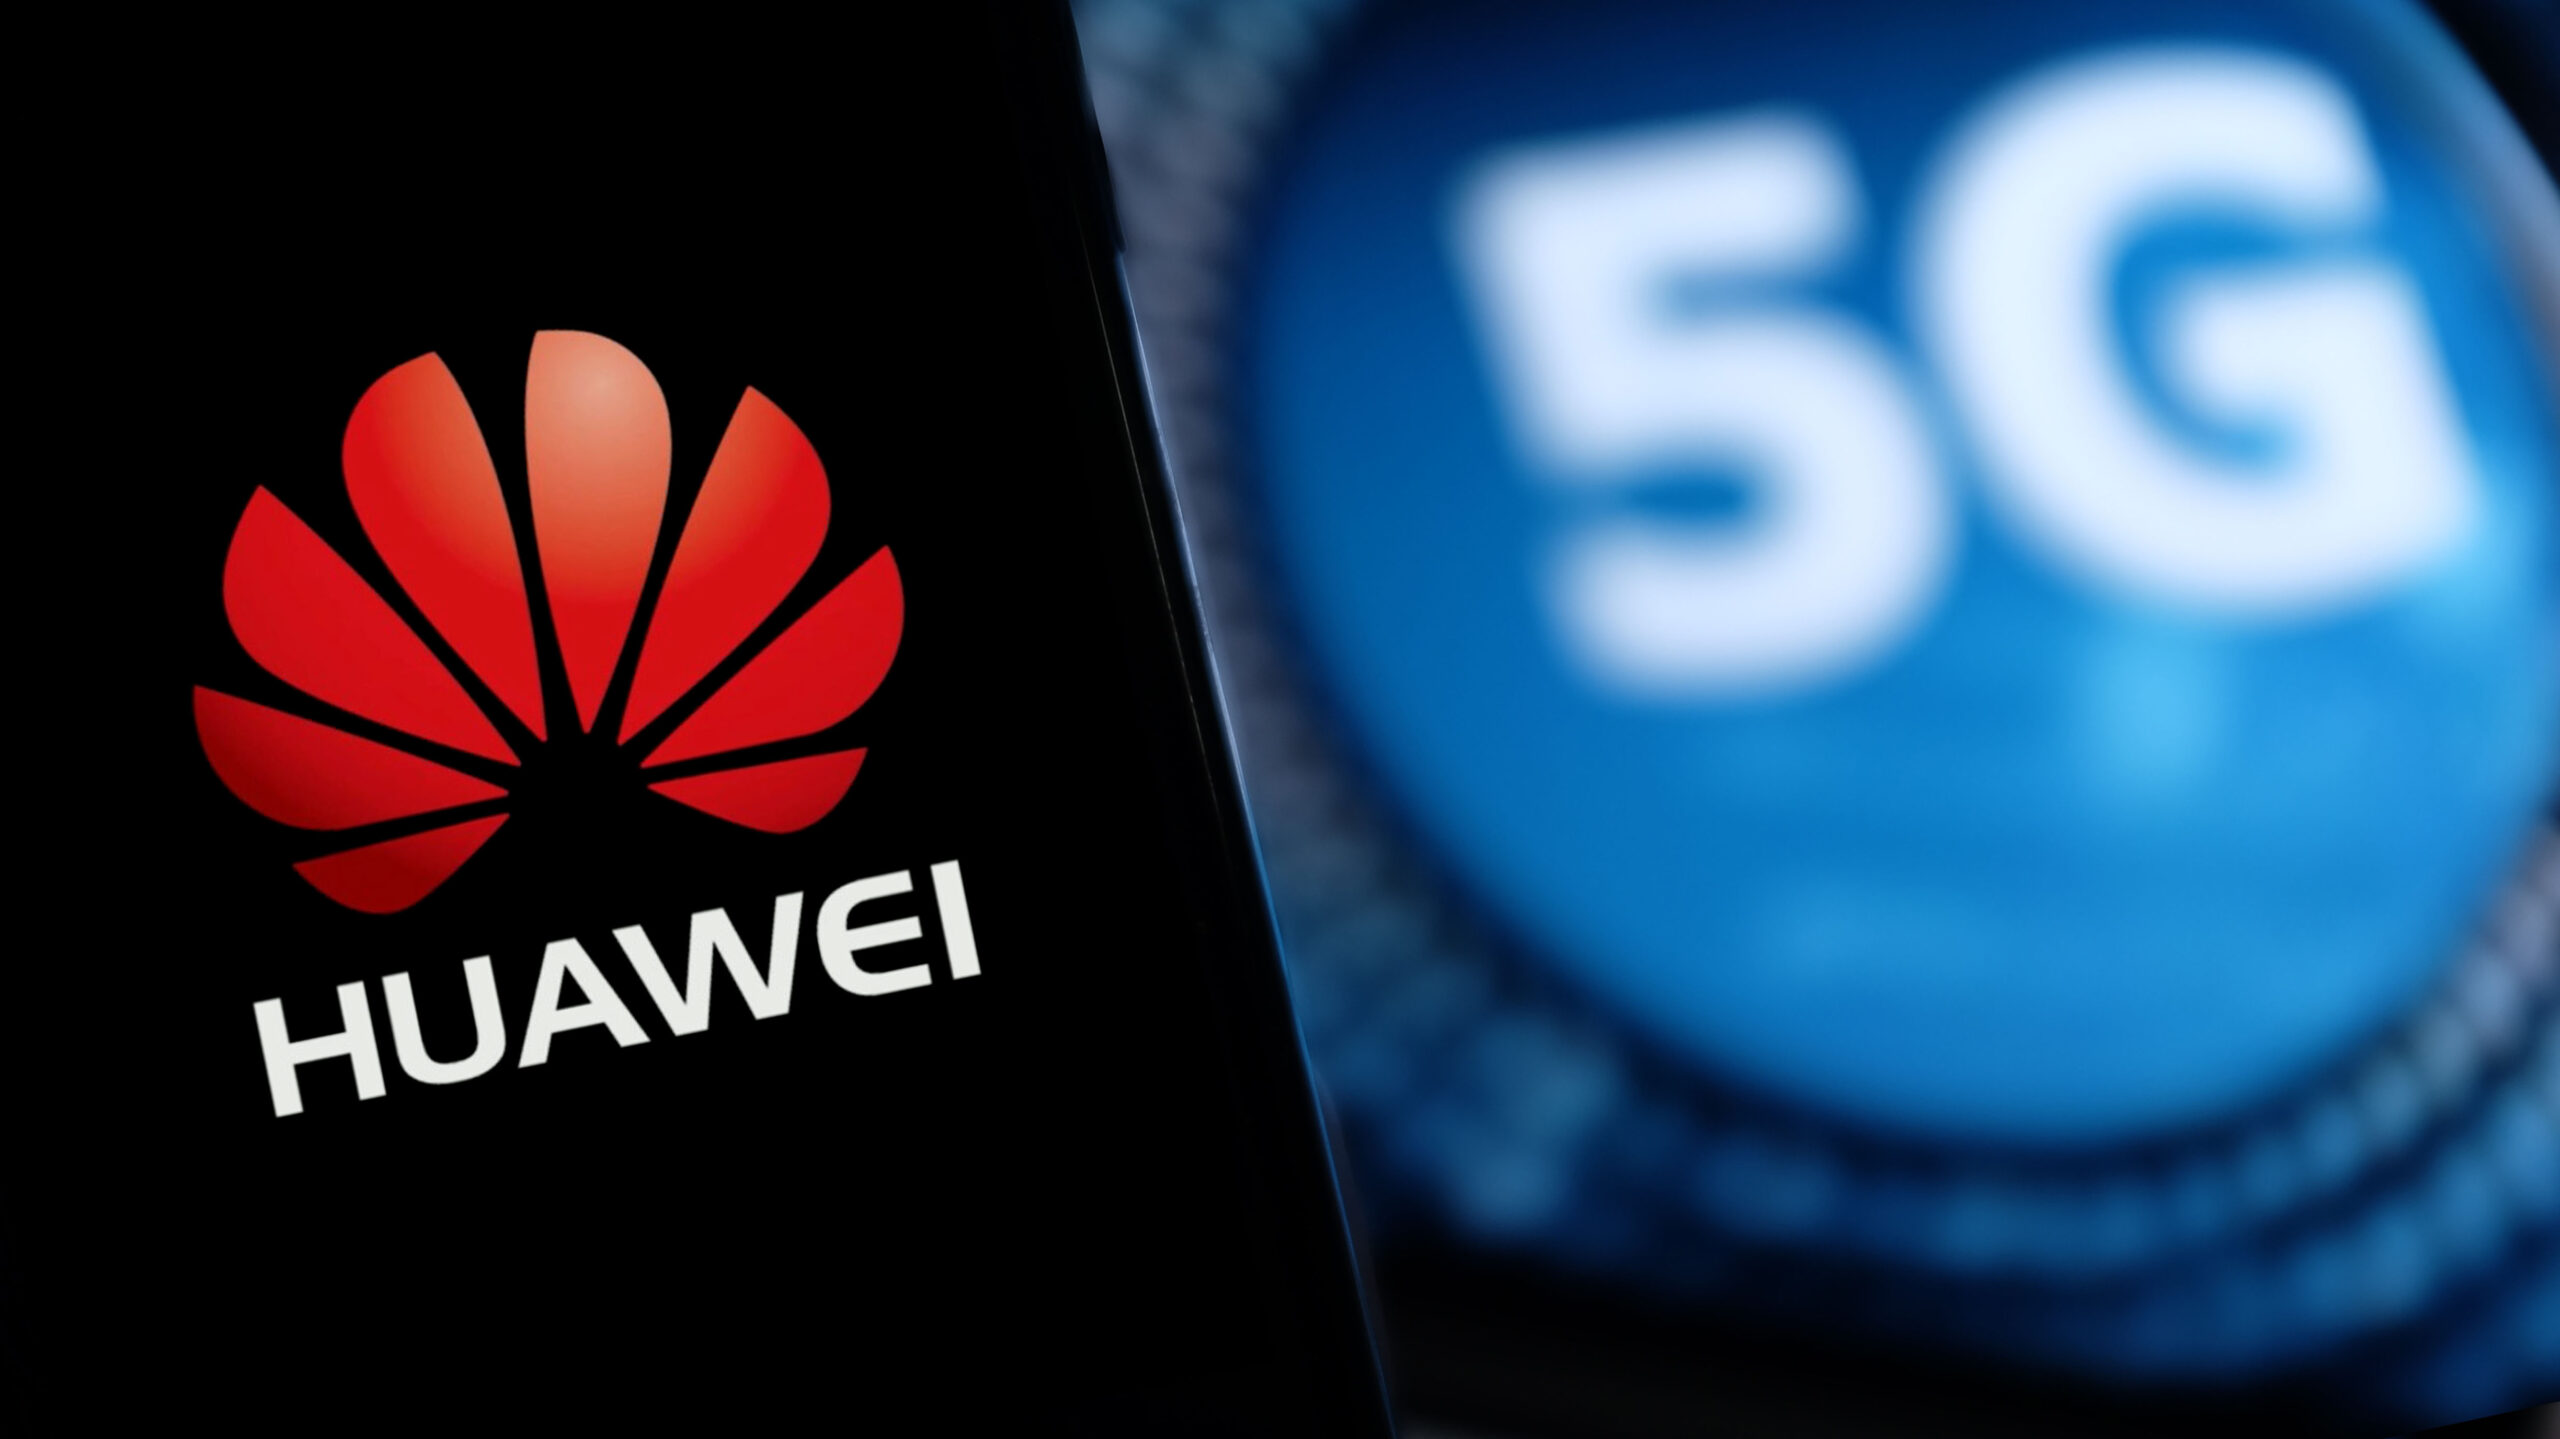 Canada bans Huawei and ZTE from 5G network